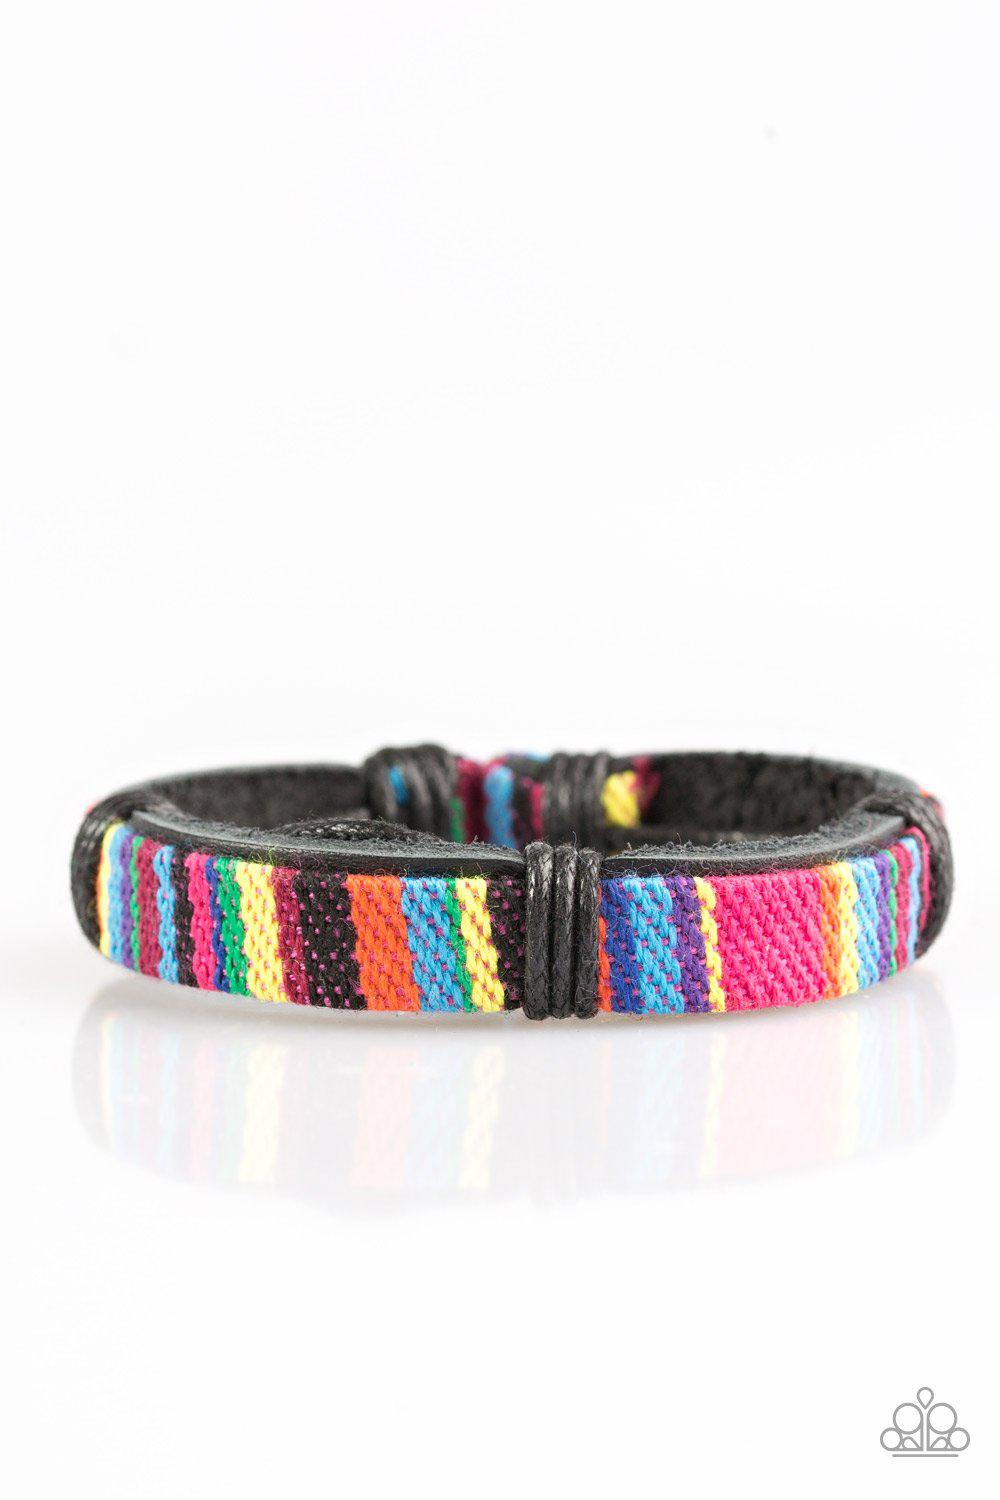 Base Camp Multi-color Leather Urban Knot Bracelet - Paparazzi Accessories - lightbox -CarasShop.com - $5 Jewelry by Cara Jewels